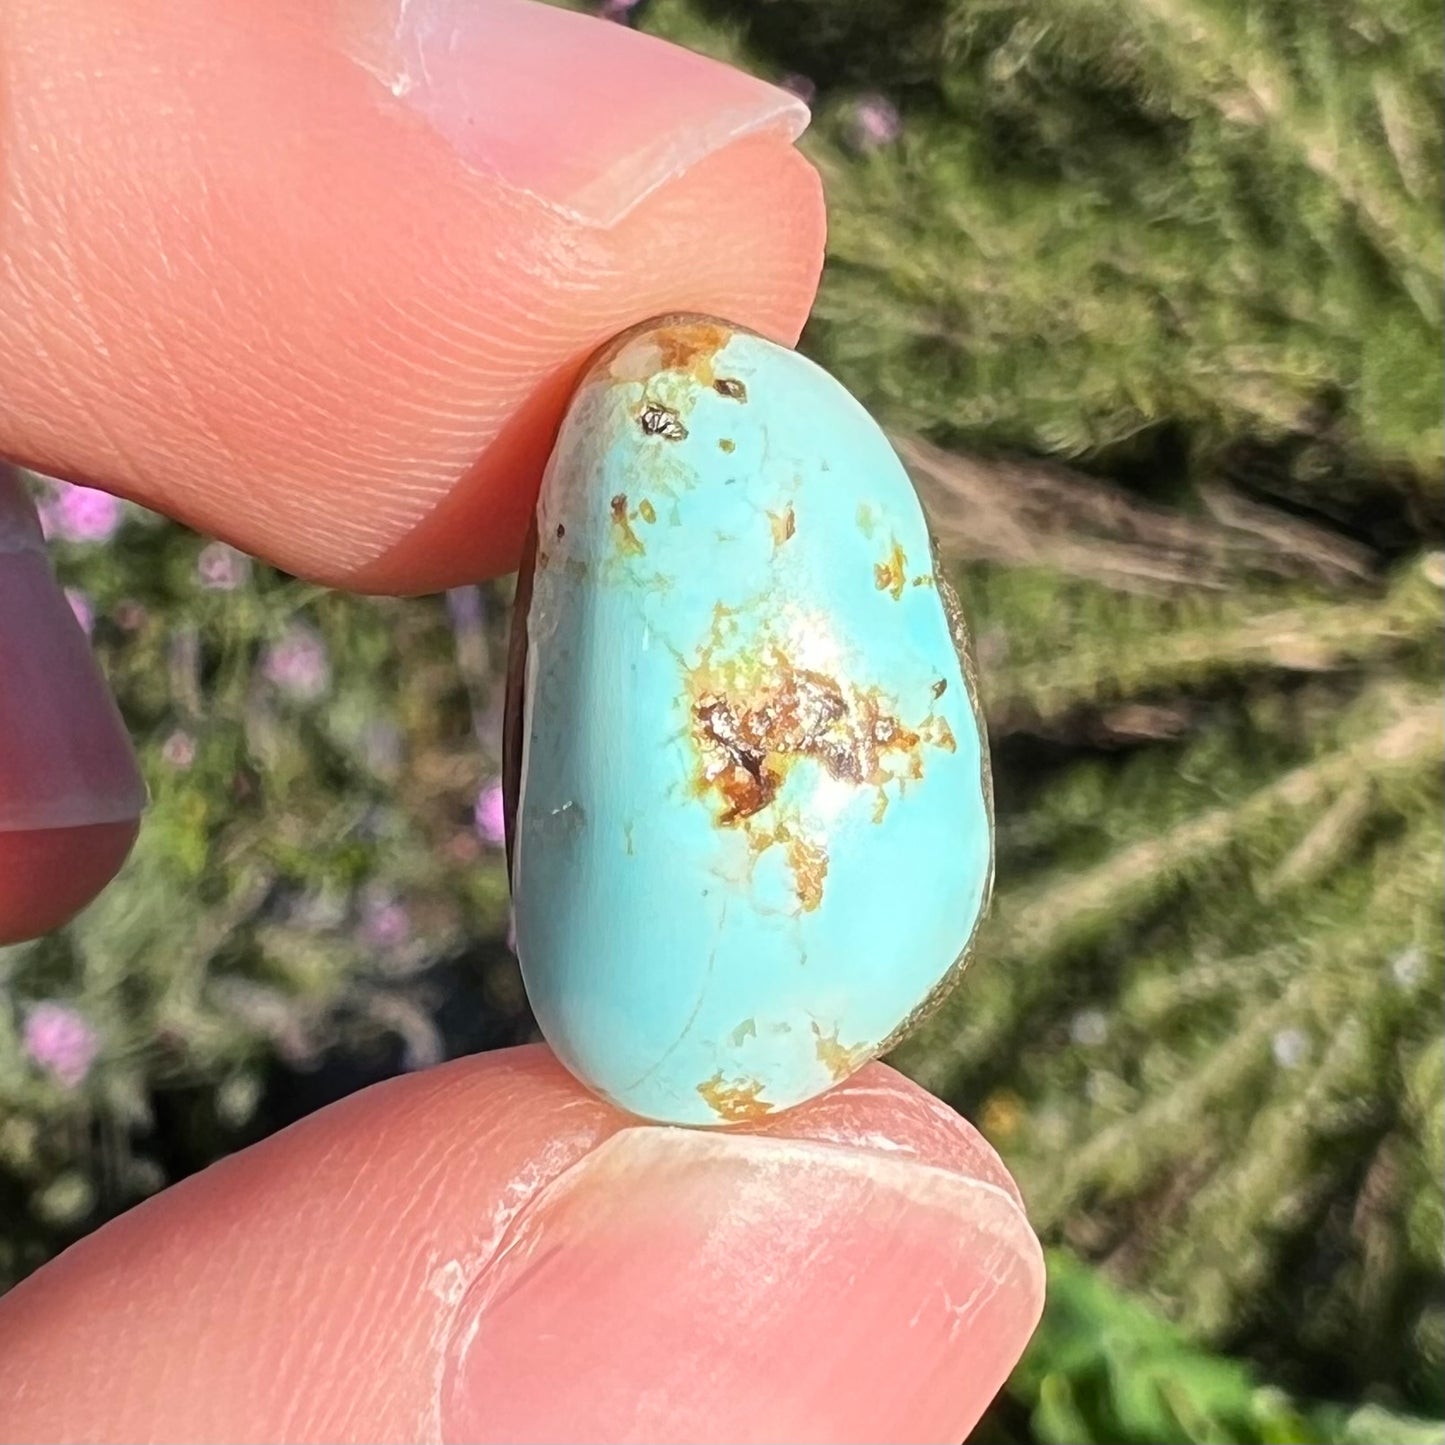 A loose turquoise cabochon from the Sleeping Beauty Mine in Arizona.  The stone is light blue with brown matrix.